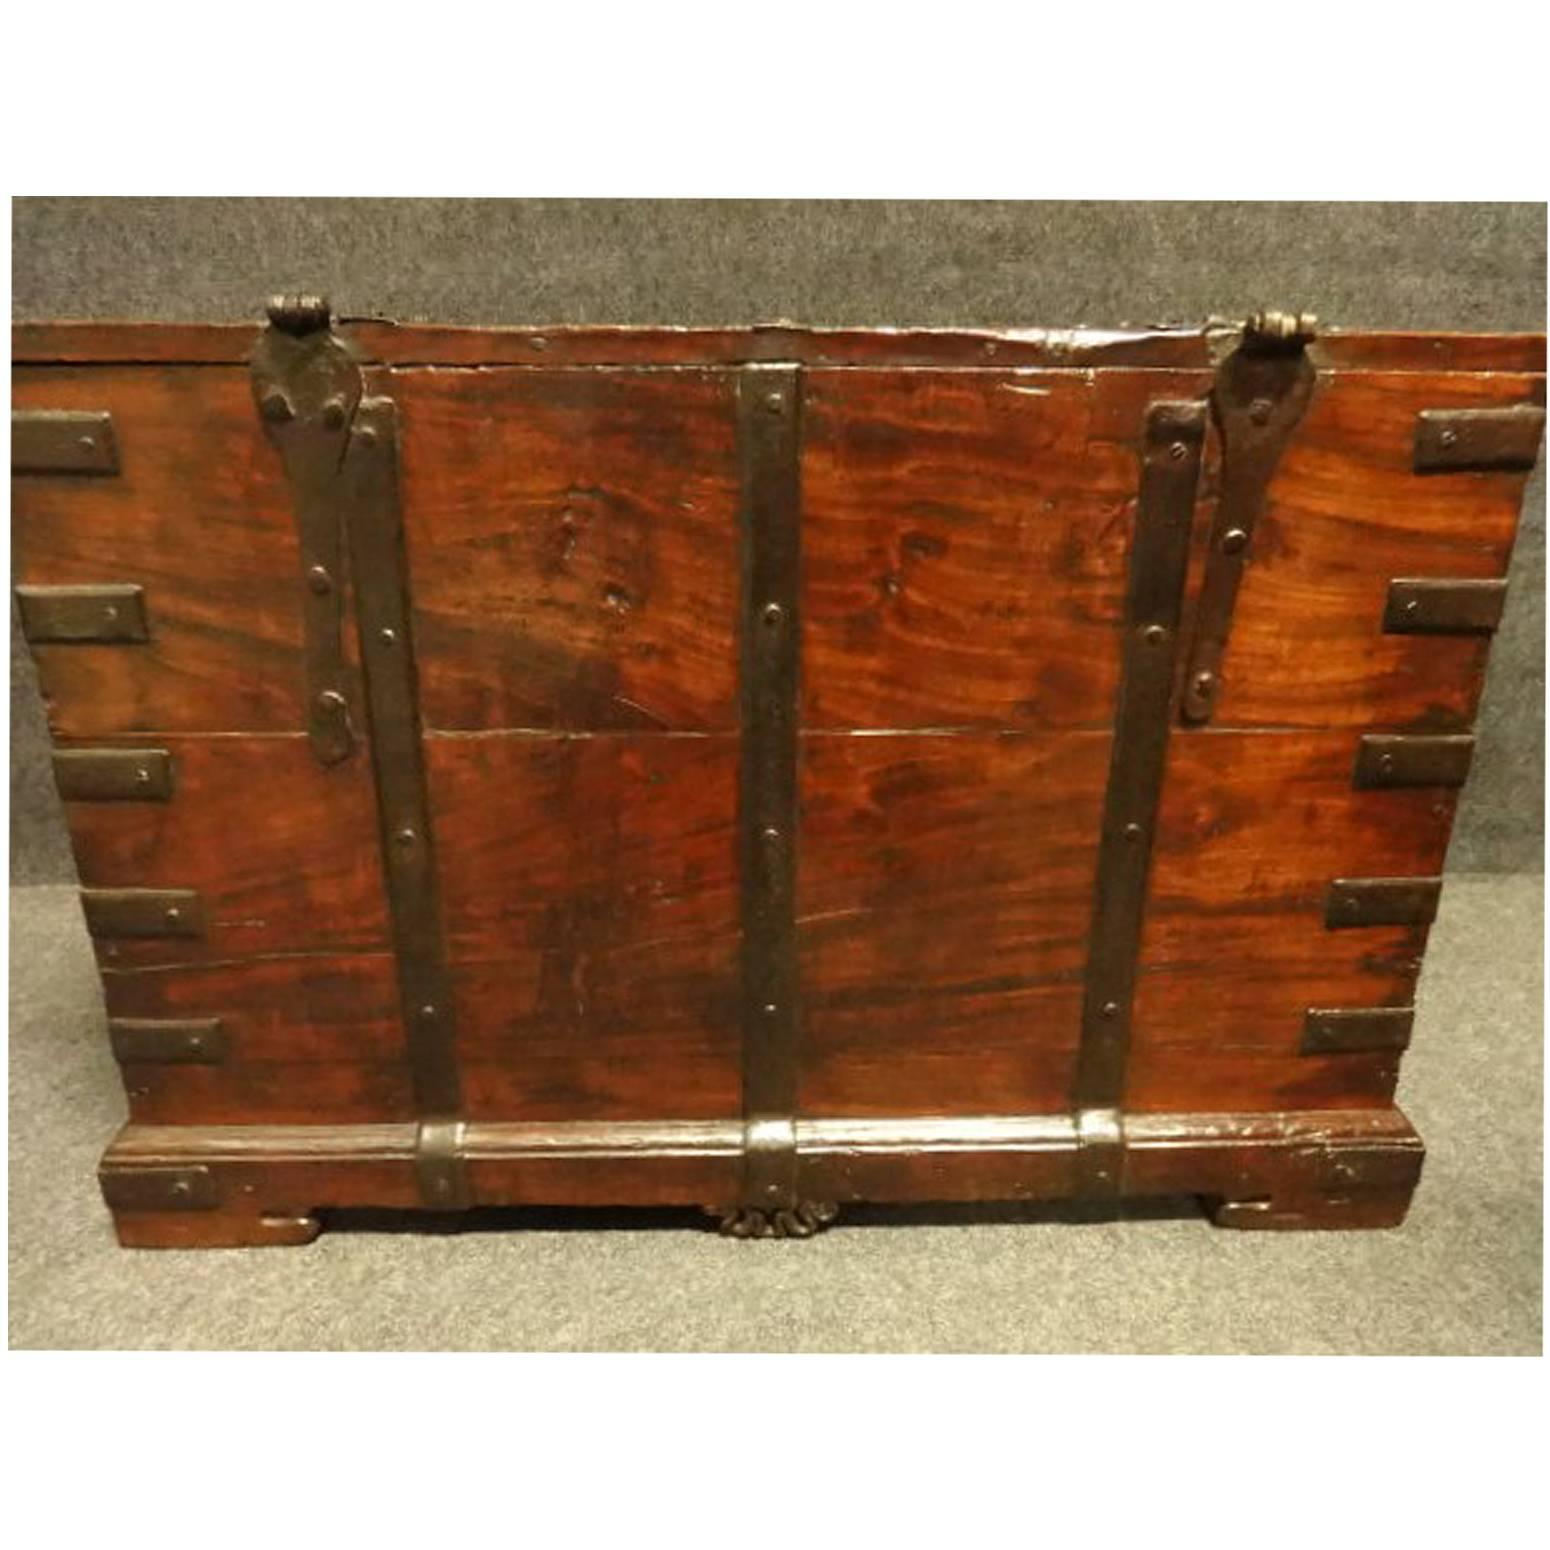 A very good teak box, bound with iron straps and brass studs, iron hasp, candle box to the inside with a secret compartment, excellent color and condition.